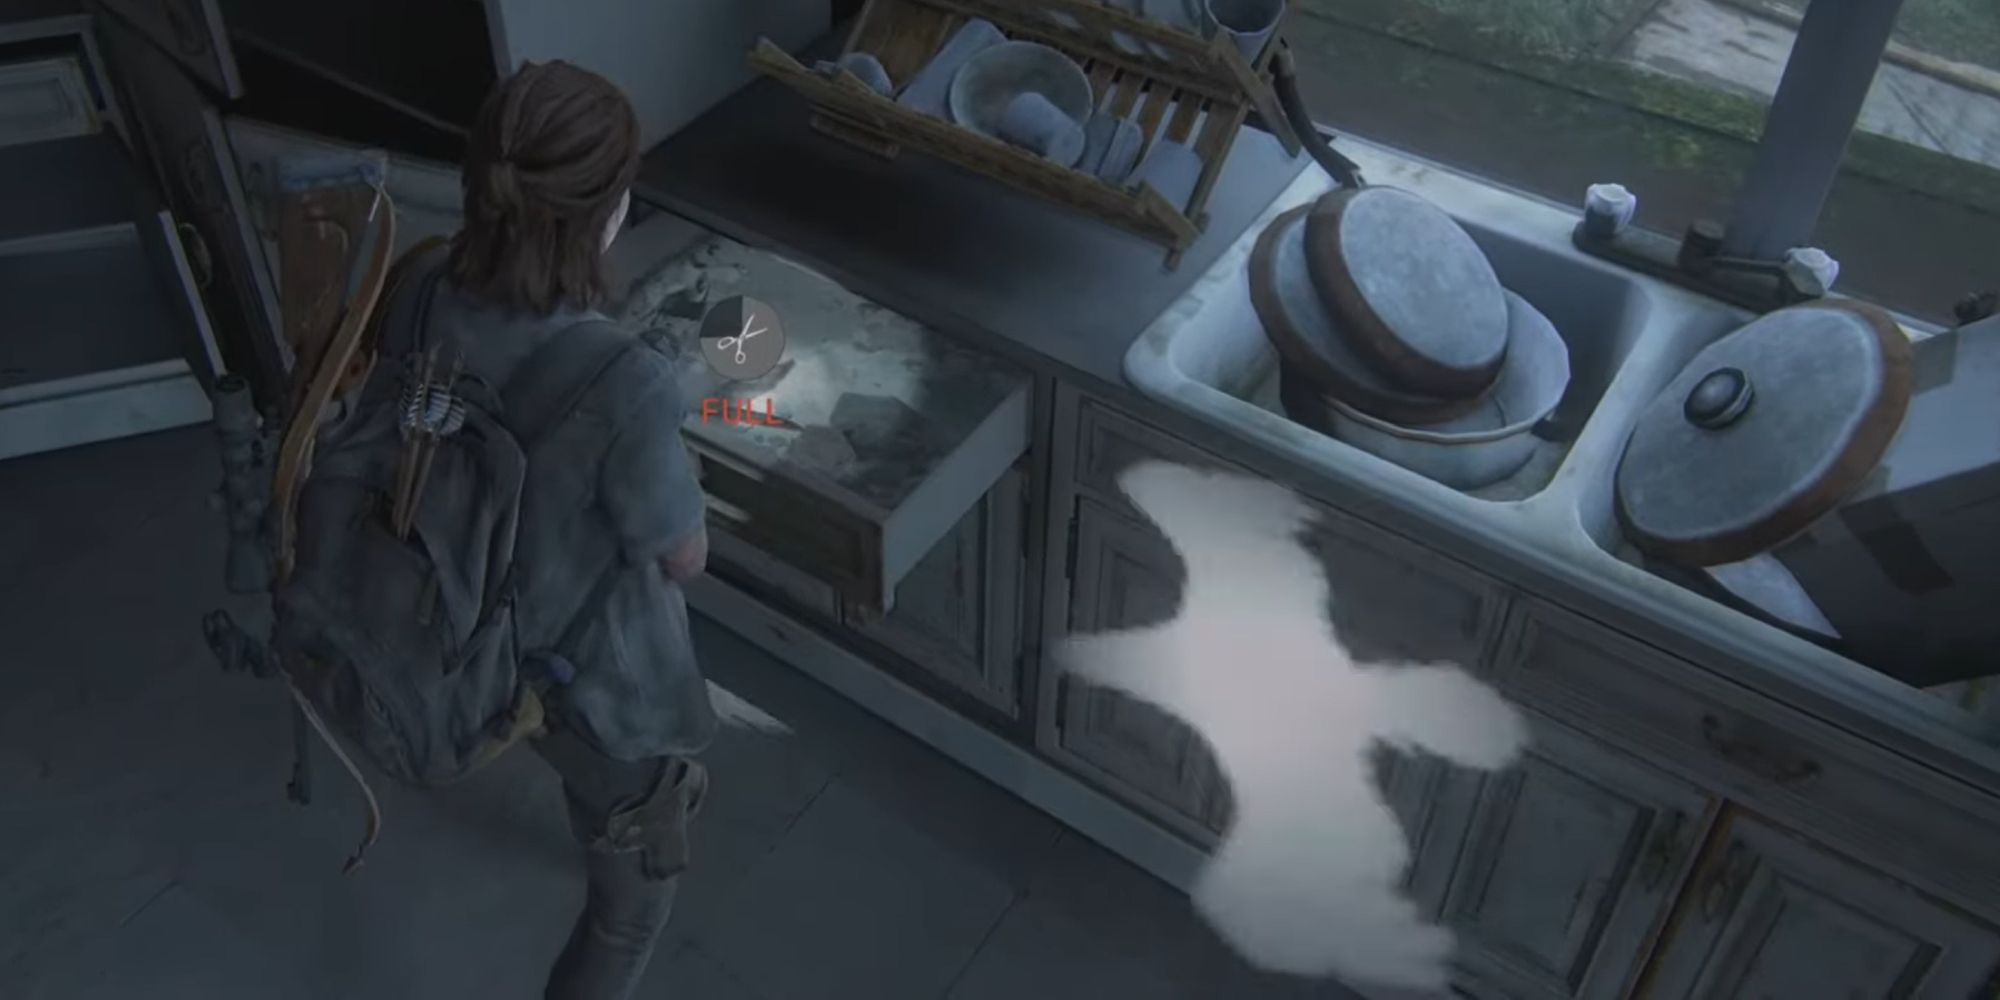 Ellie searching a draw with a phantom bird next to her